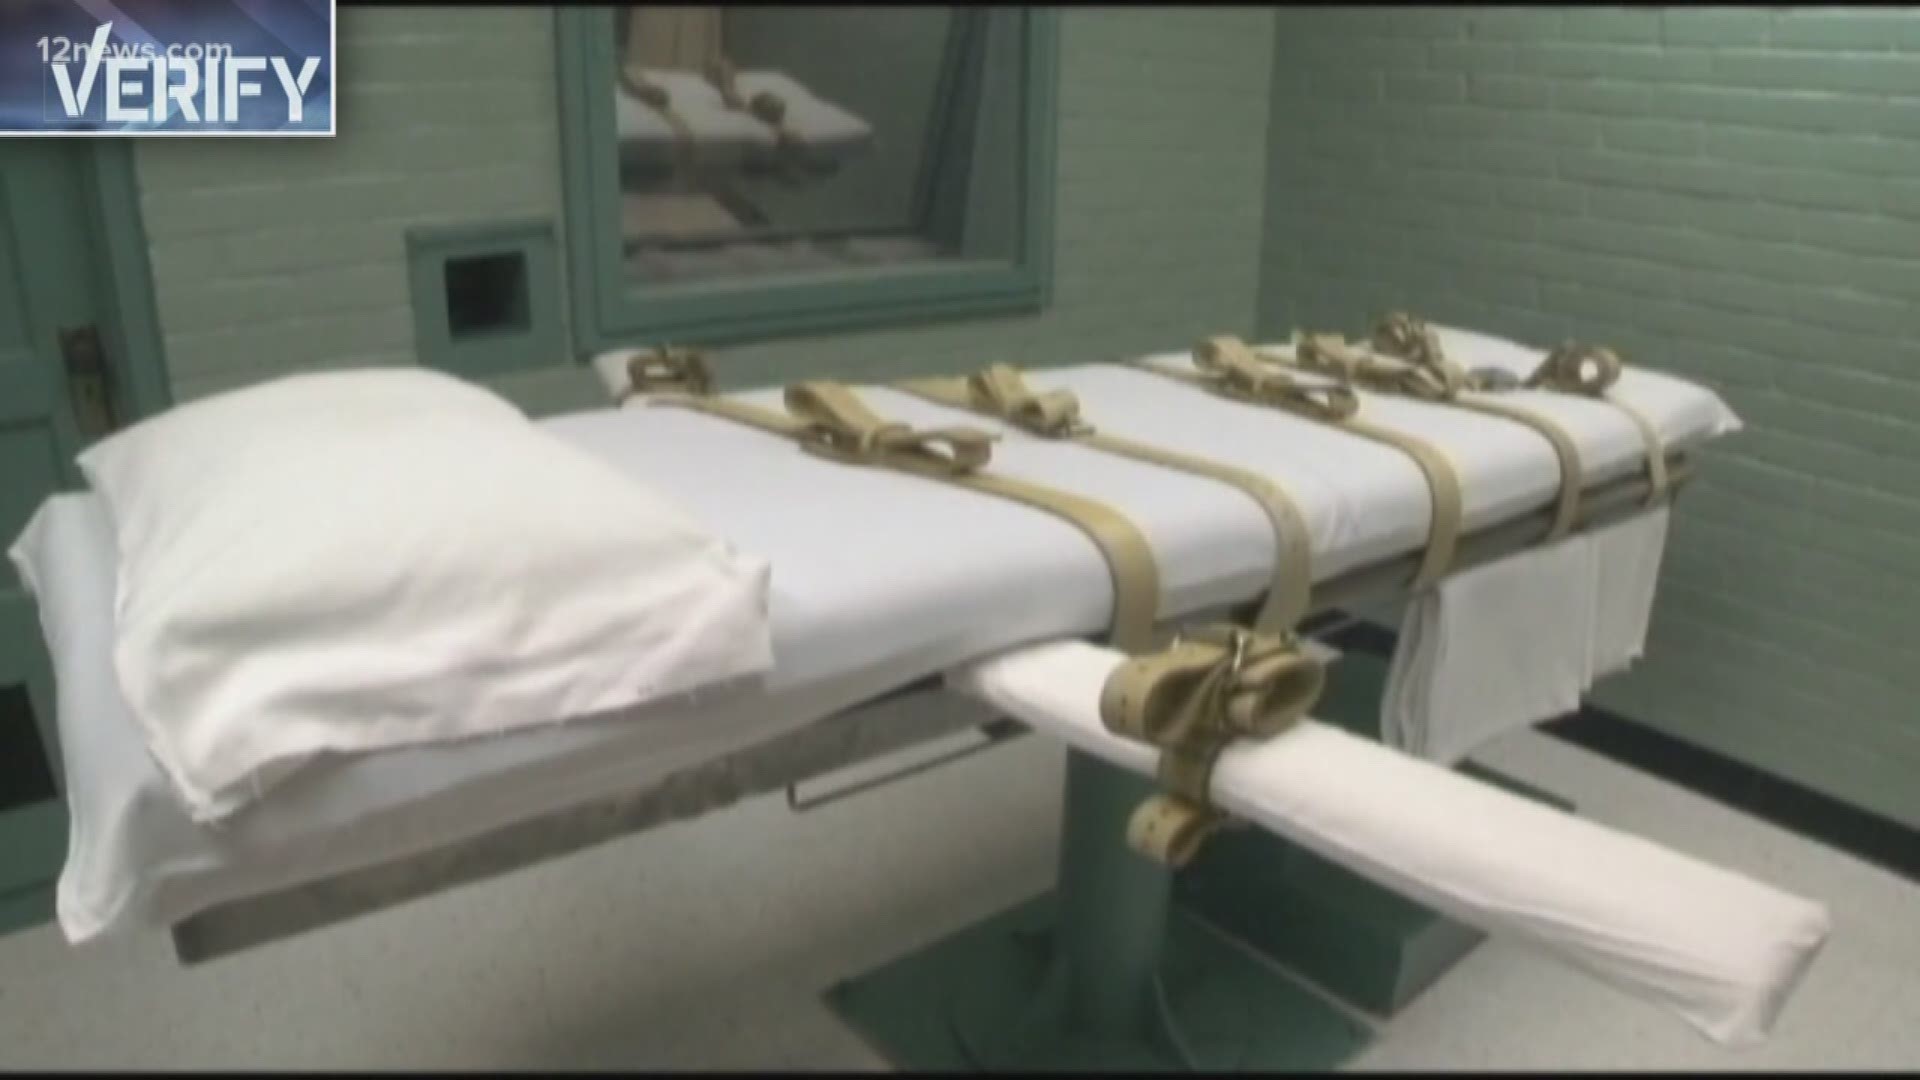 Arizona joins 13 other states battling with drug companies over the death penalty. The only way to avoid the execution  controversy would be to change the law.